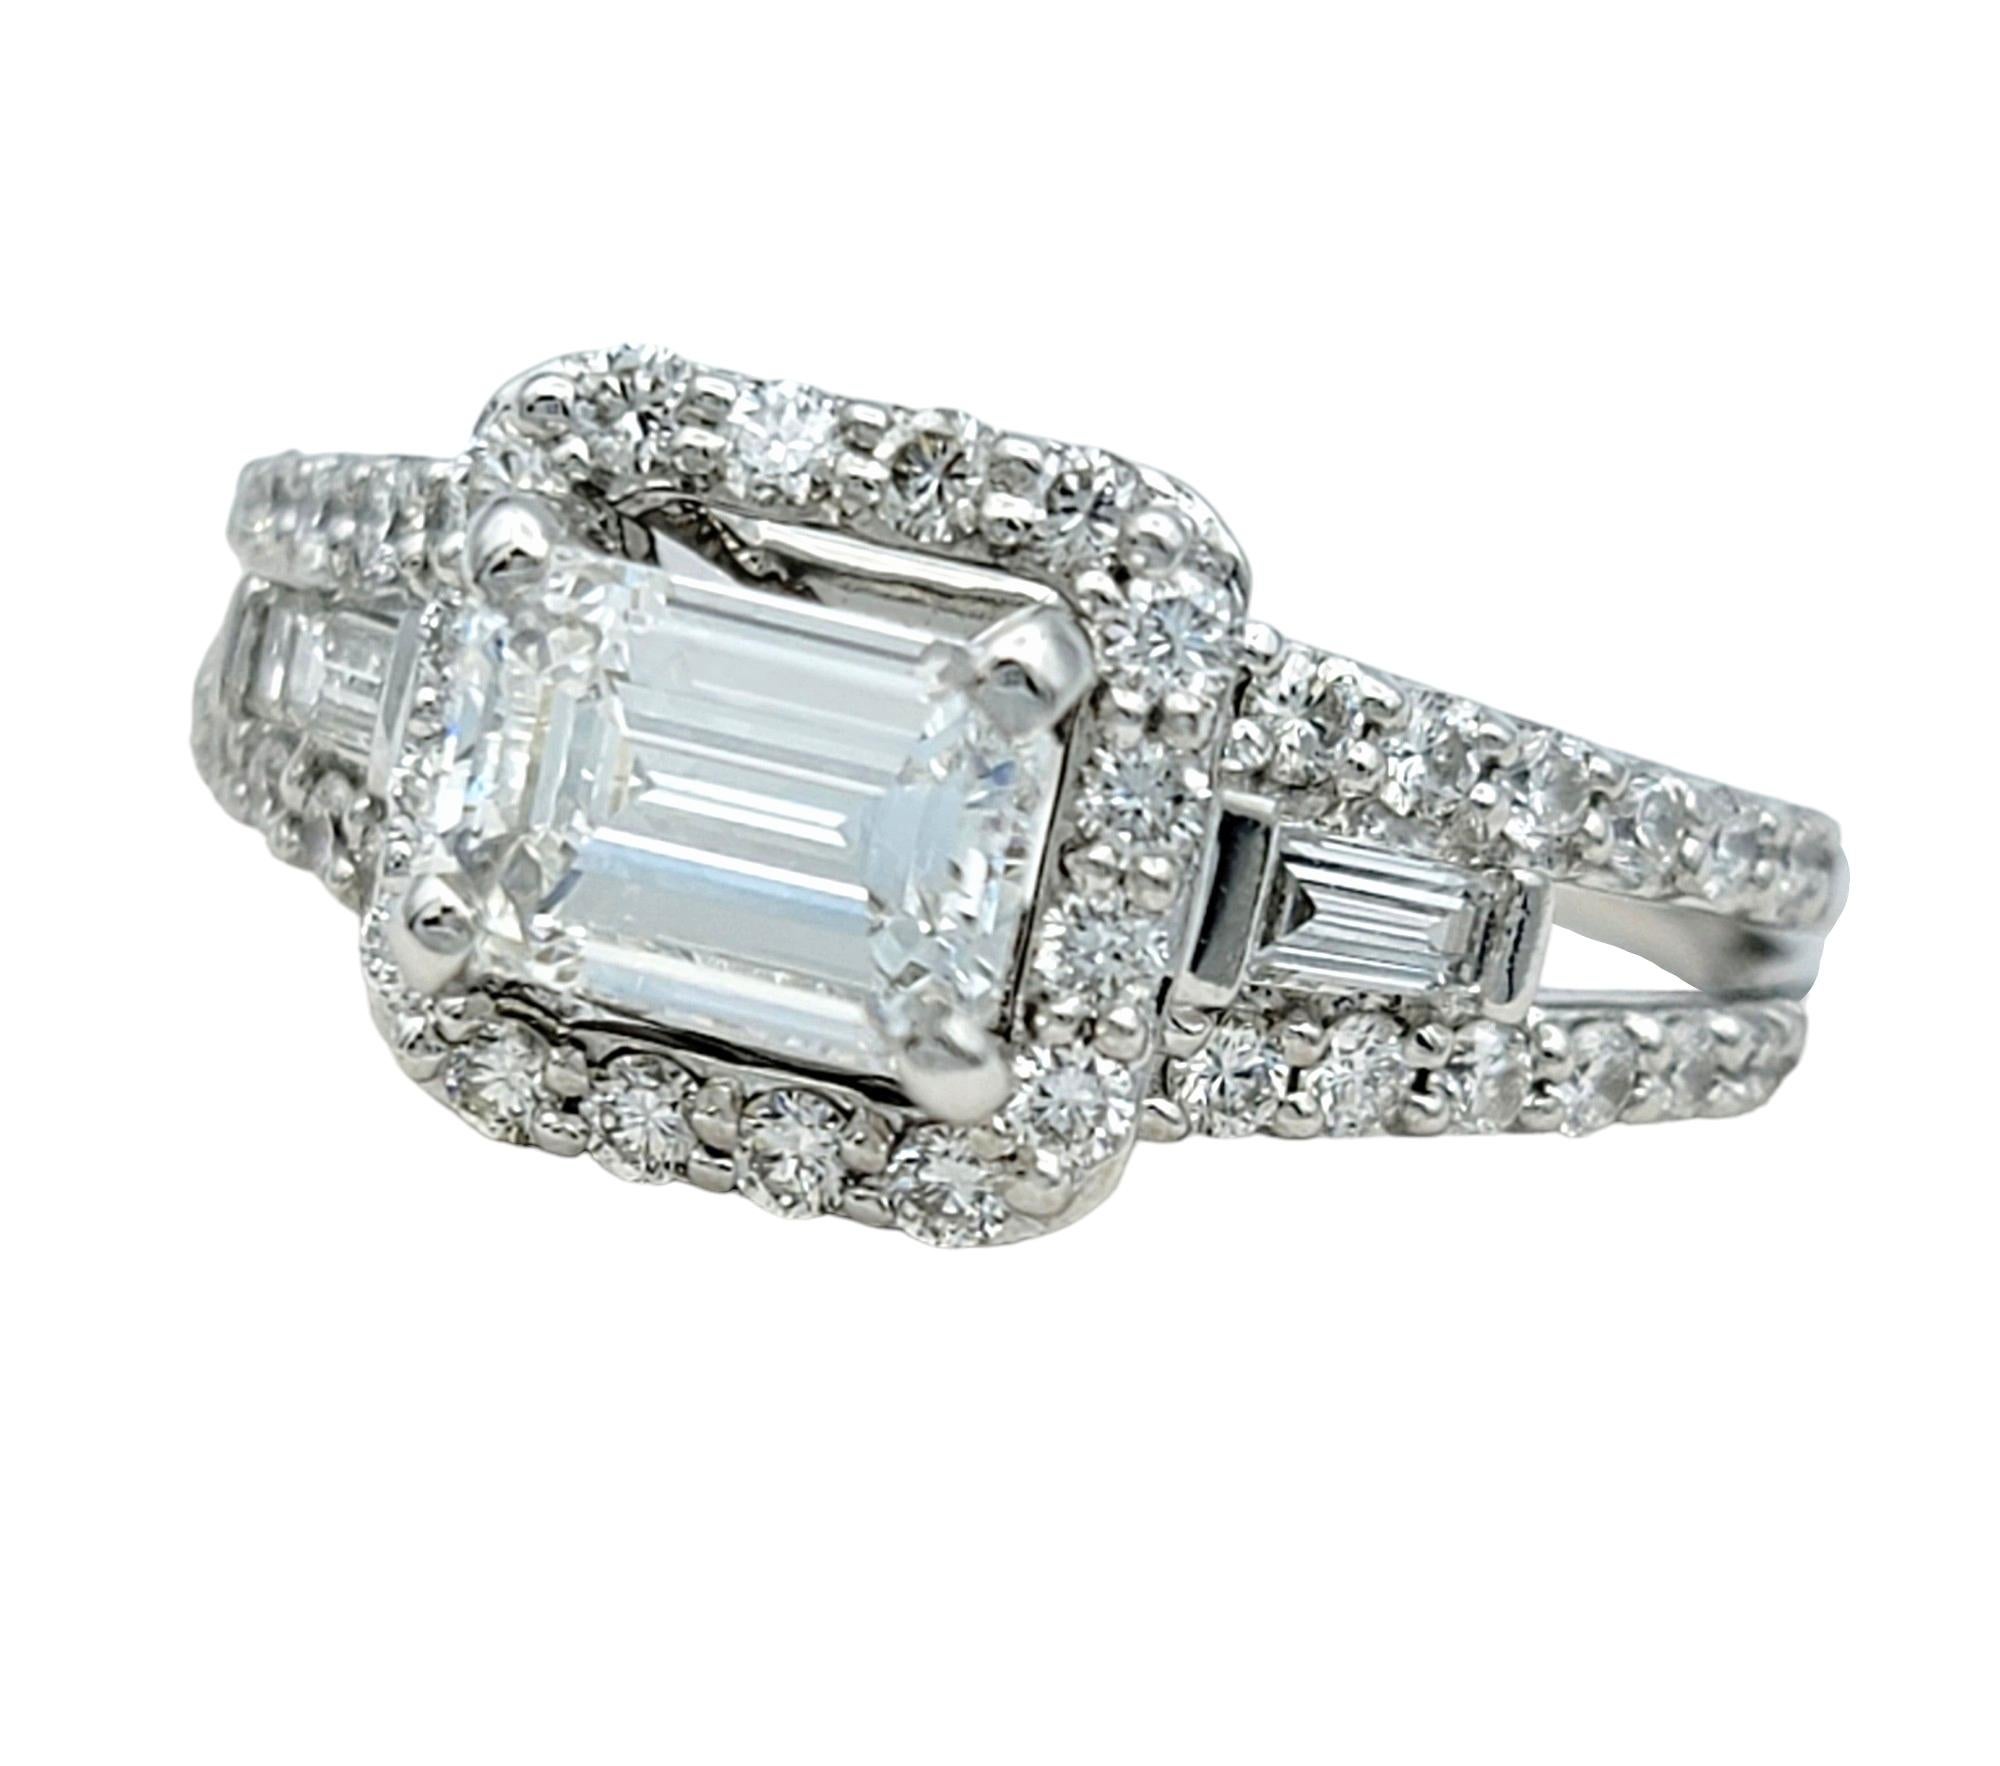 Emerald Cut Diamond and Squared Halo Engagement Ring White Gold, D-E / VVS1-VVS2 In Good Condition For Sale In Scottsdale, AZ